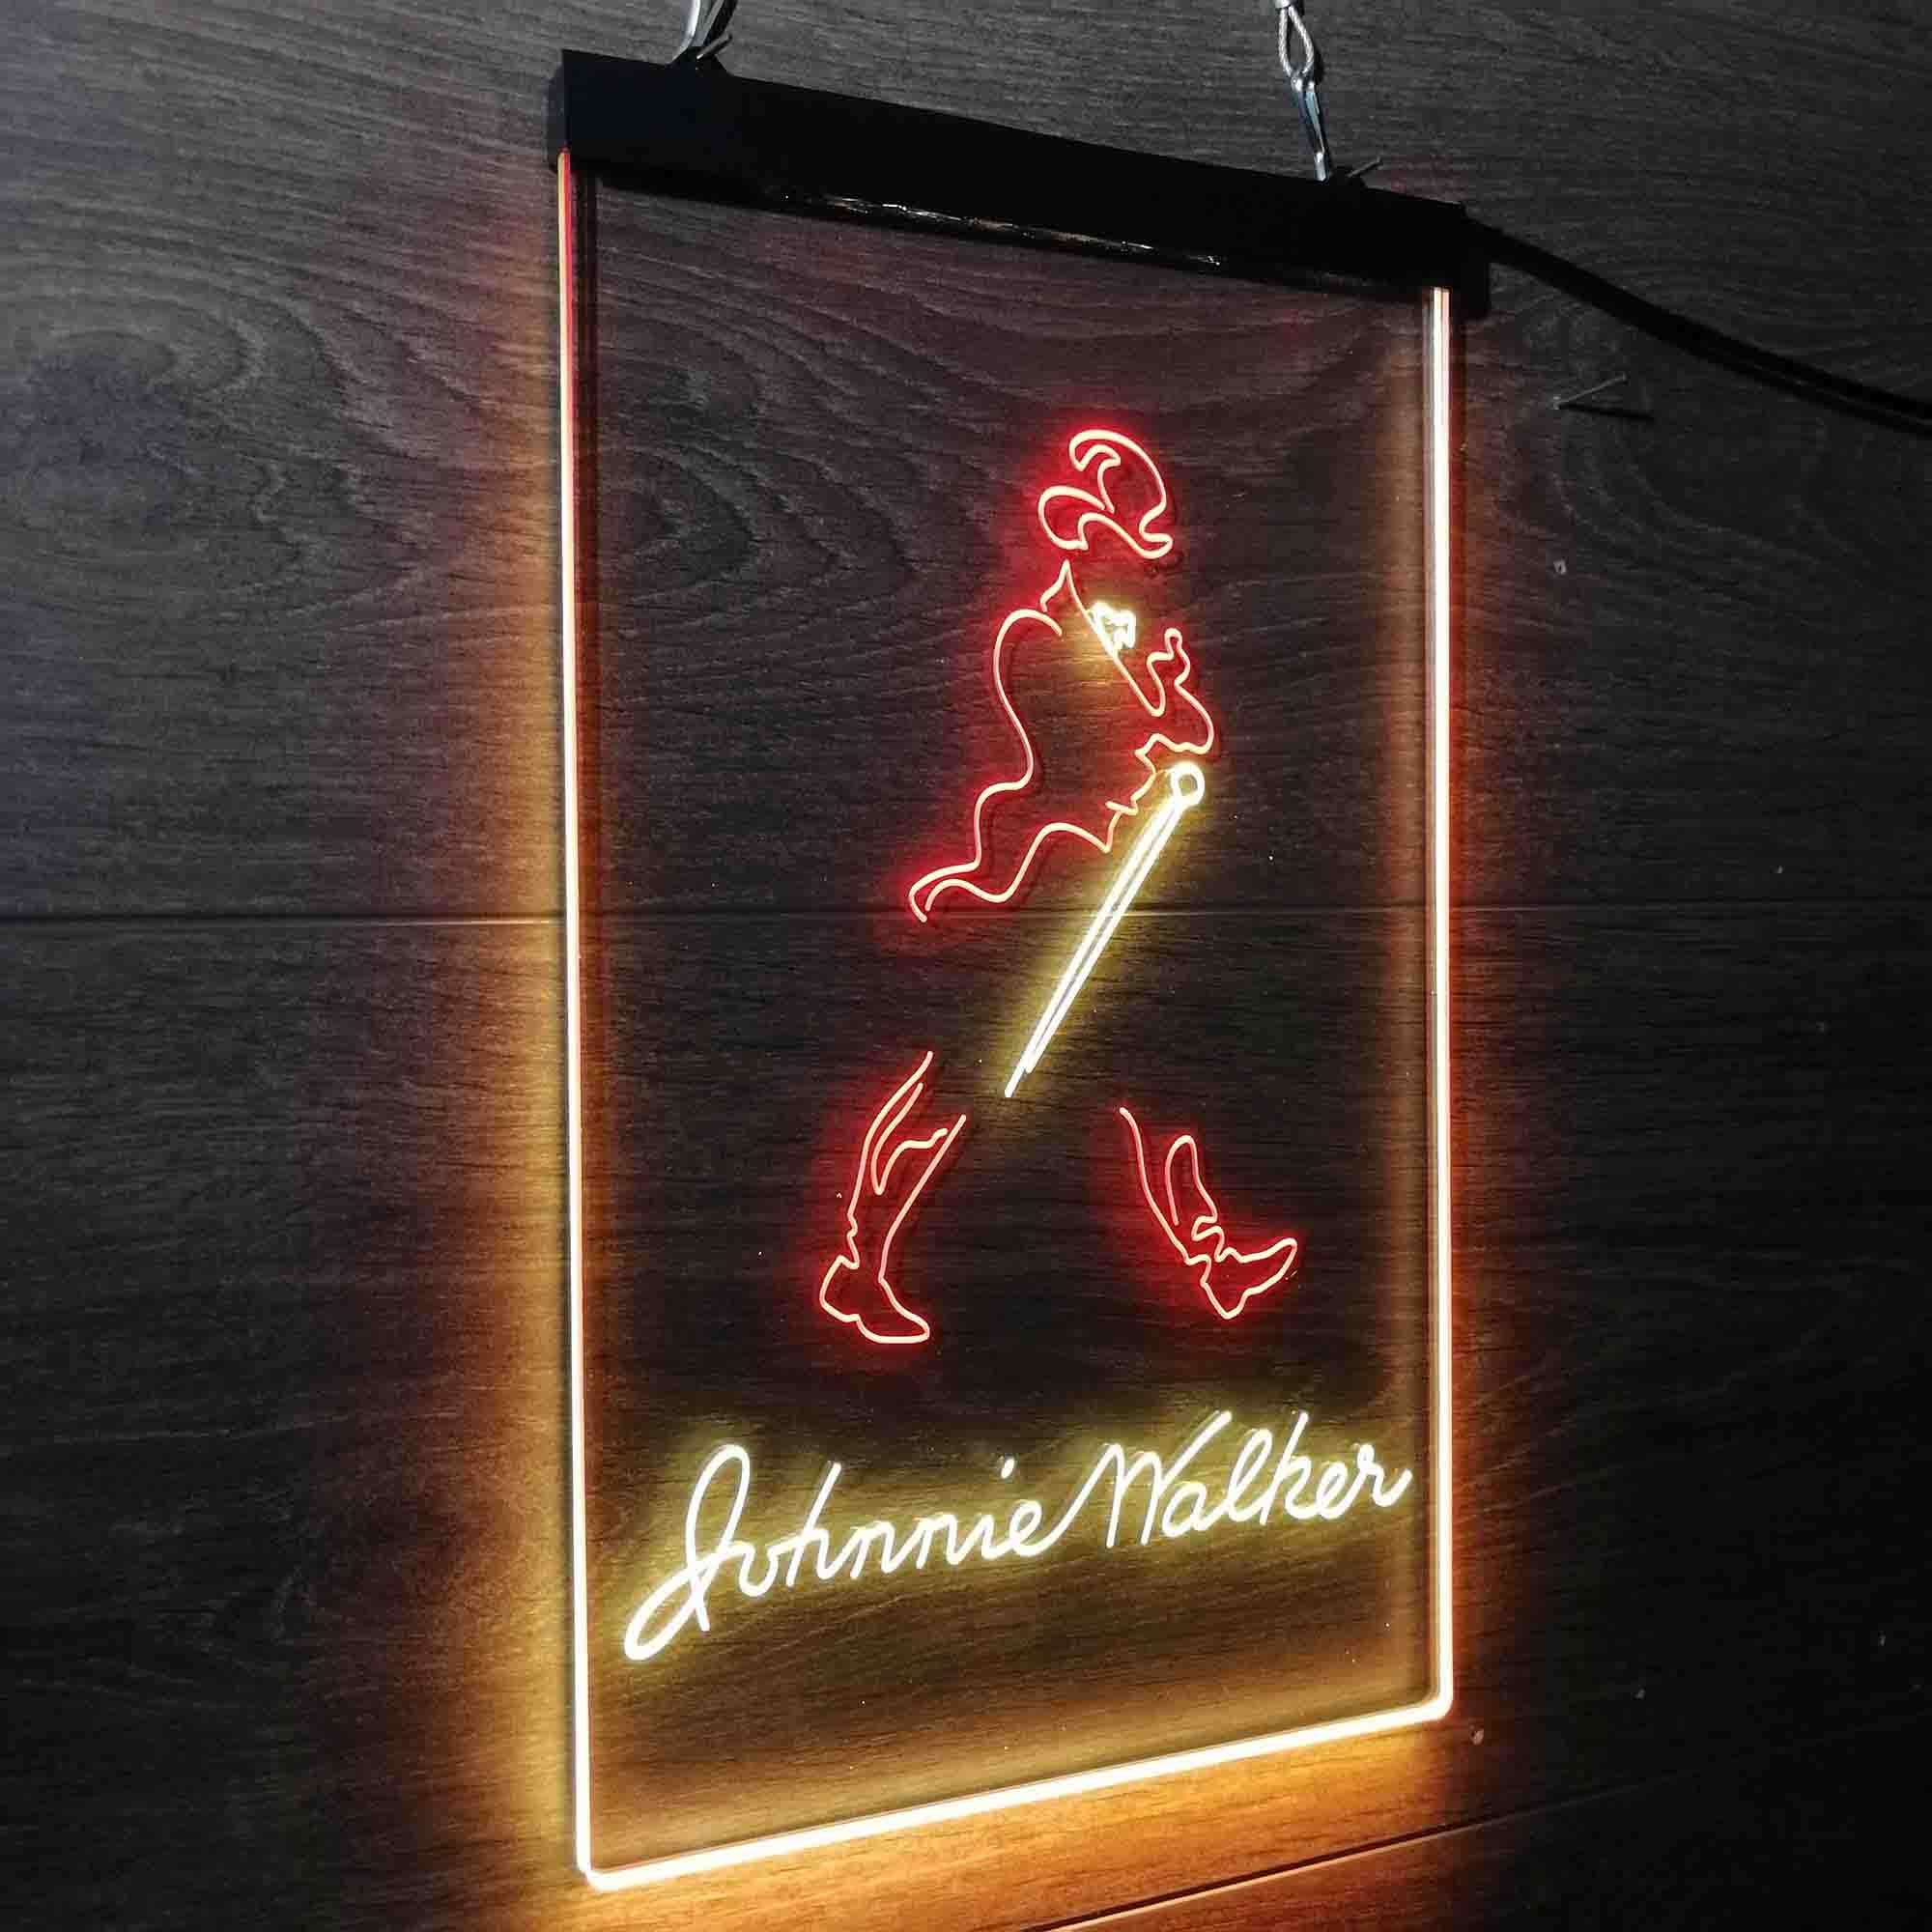 Johnnie Walker Right Neon-Like LED Sign